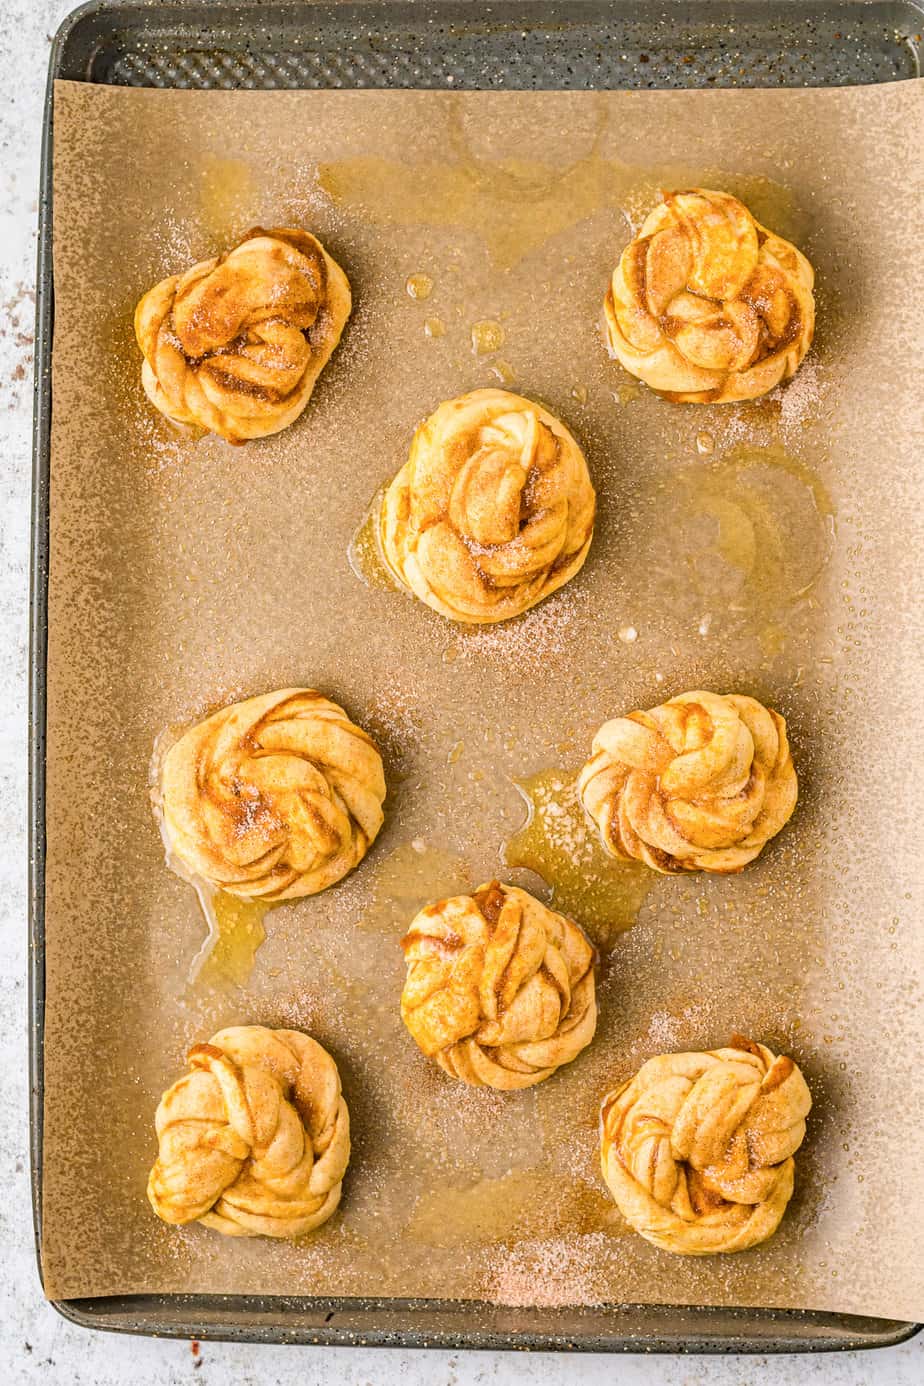 Pumpkin Crescent Roll pastries uncooked on a pan.